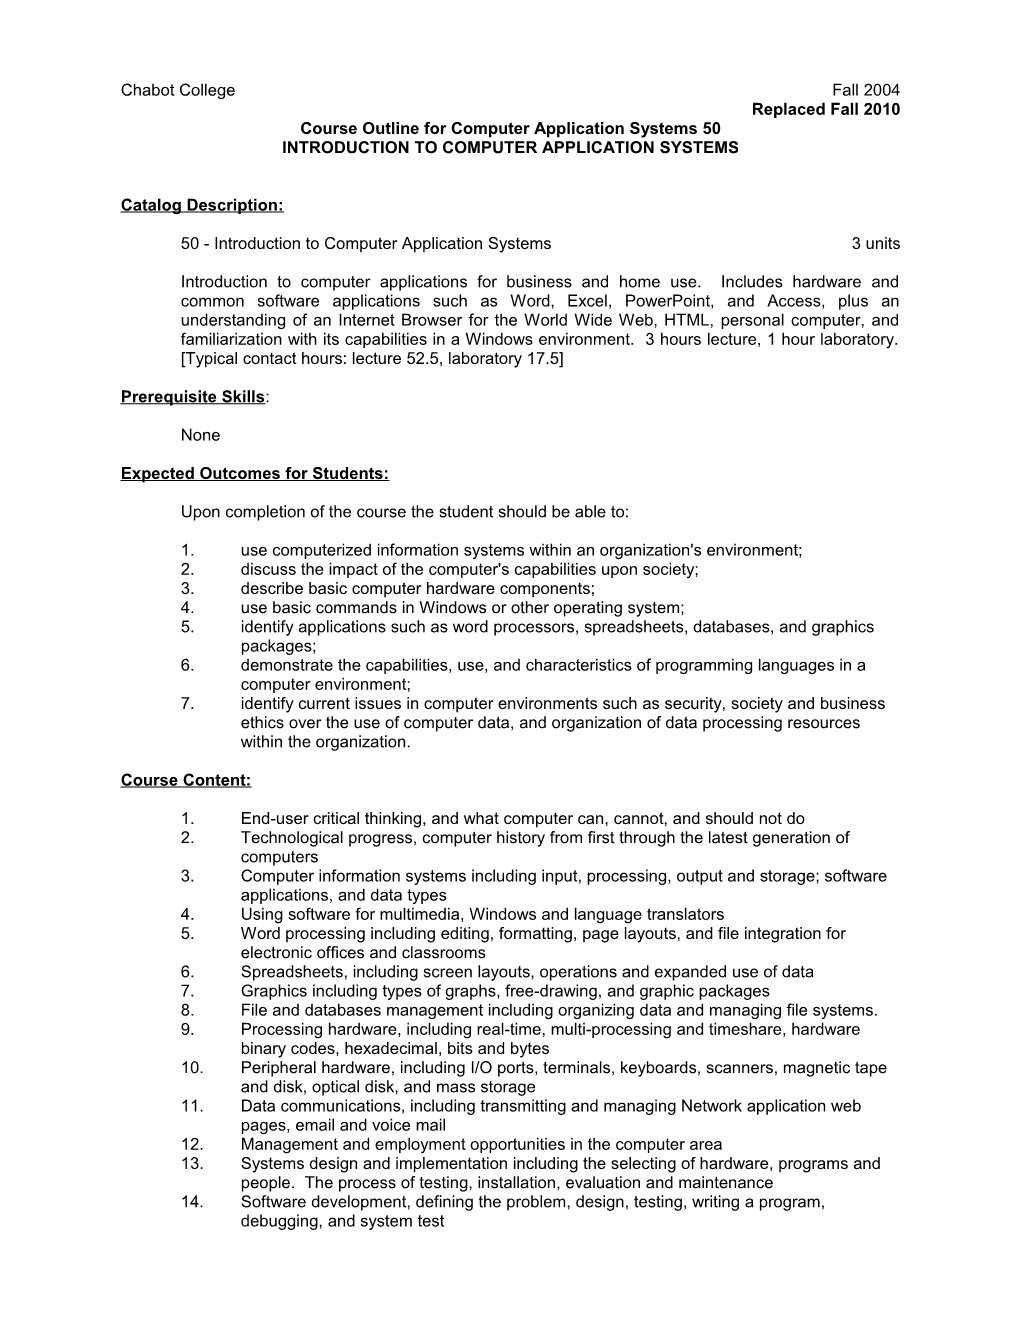 Course Outline for Computer Application Systems 50, Page 2